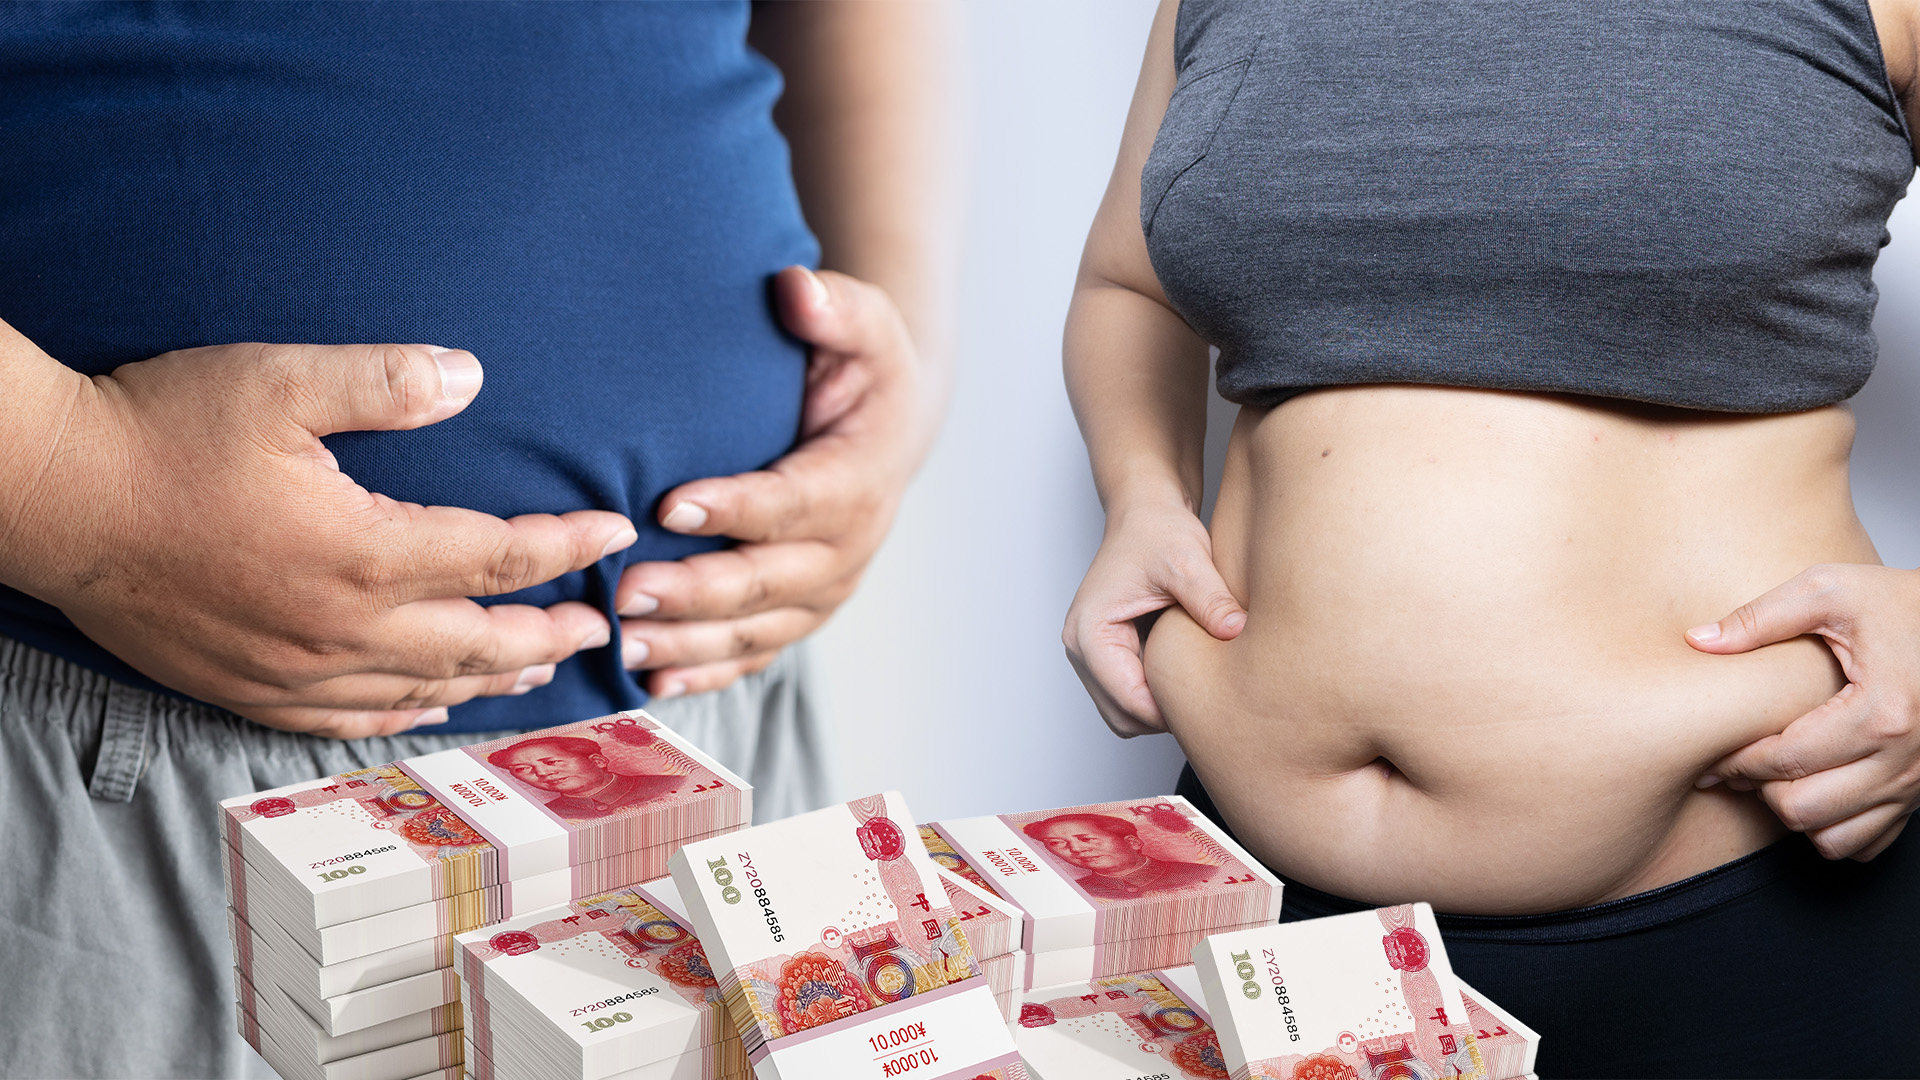 A tech firm in China has set up a cash incentive scheme for staff who work to lose weight. Photo: SCMP composite/Shutterstock